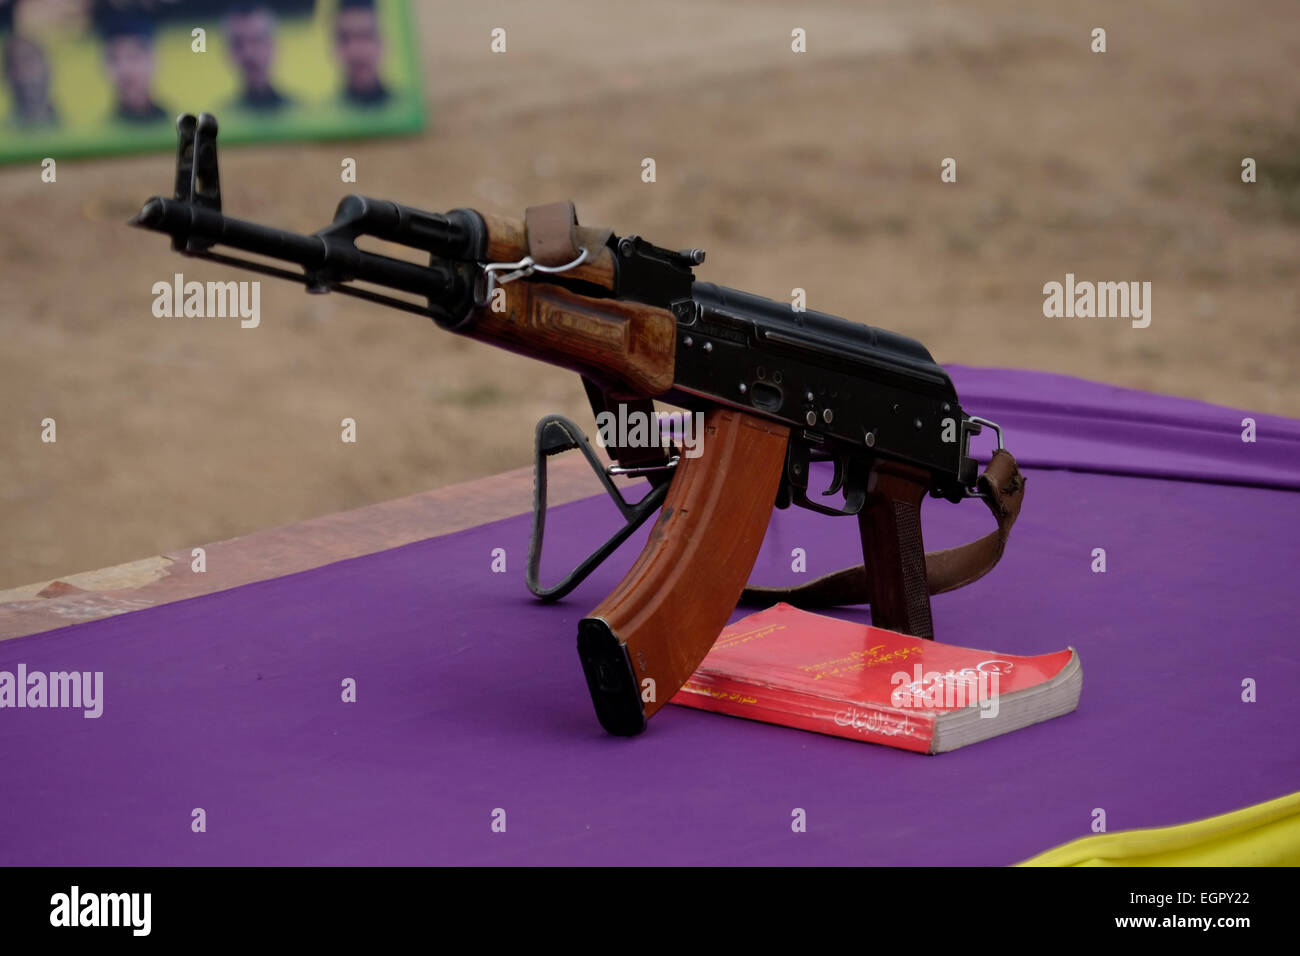 A Kalashnikov ak-47 rifle placed on a table with the Political Thought of Abdullah Ocalan Kurdish leader and one of the founding members of the militant Kurdistan Workers' Party PKK during swearing ceremony of Kurdish fighters YPG in a recruitment camp in Al Hasakah or Hassakeh district in northern Syria Stock Photo